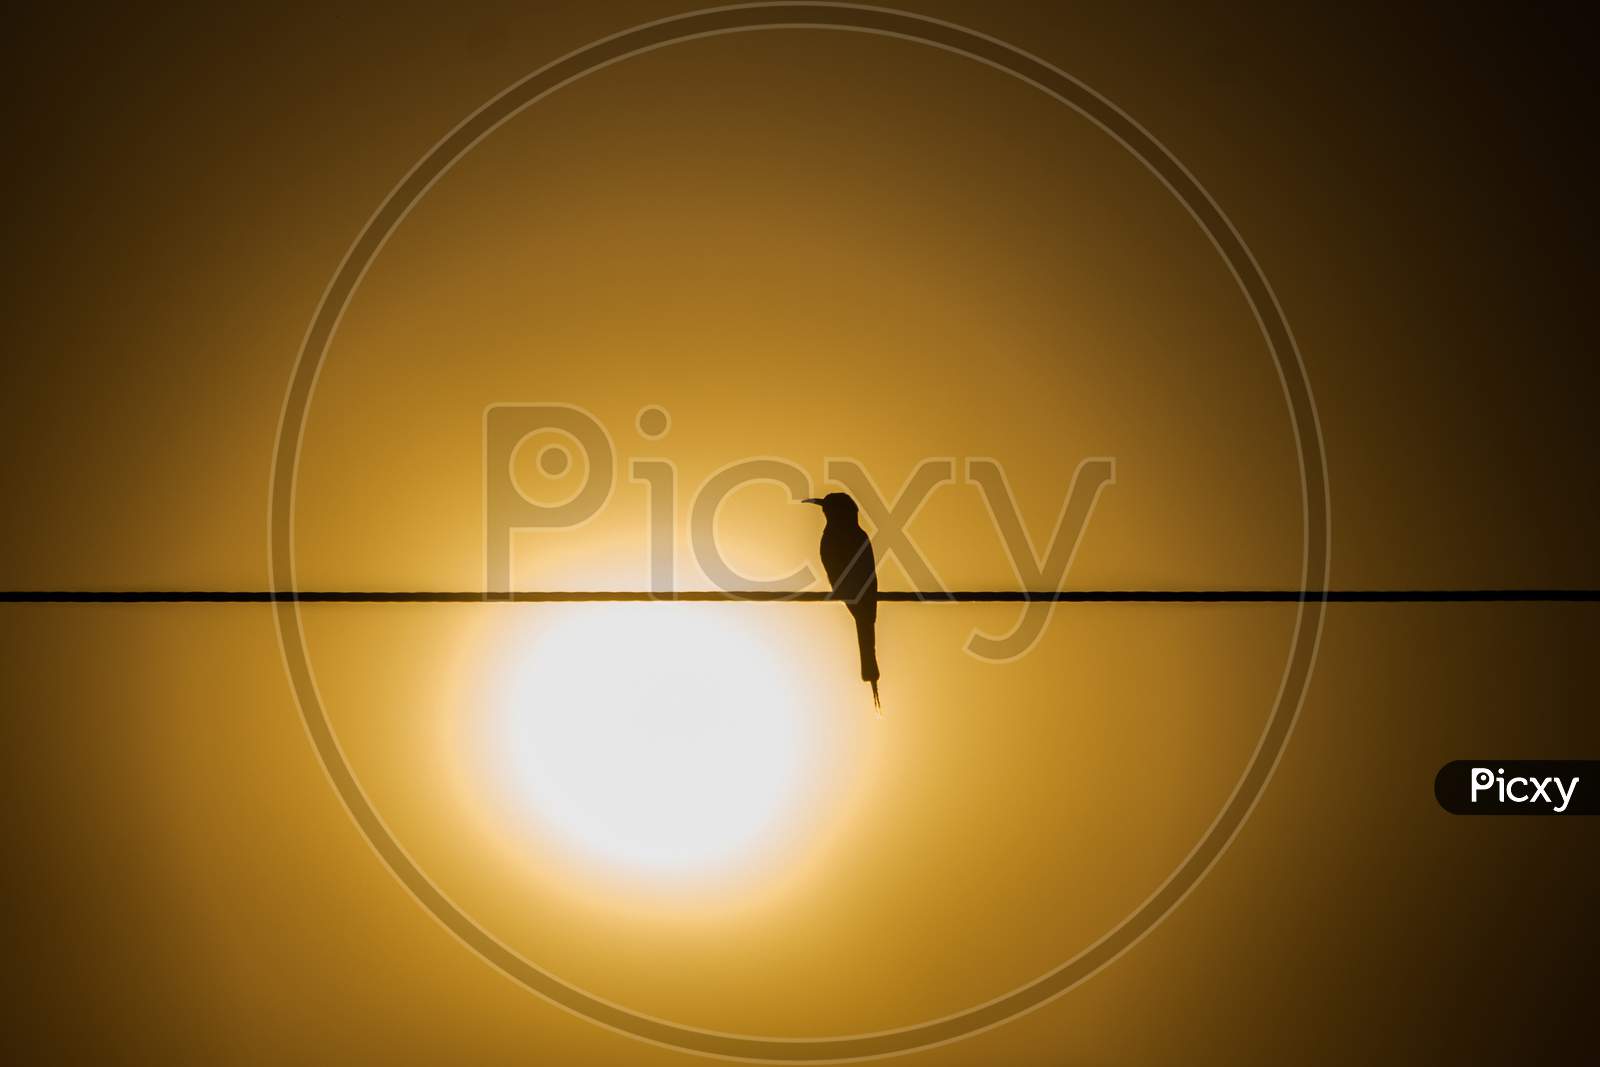 A Bird Is Sitting On The Wire.  The Picture Was Taken With The Sun Behind.